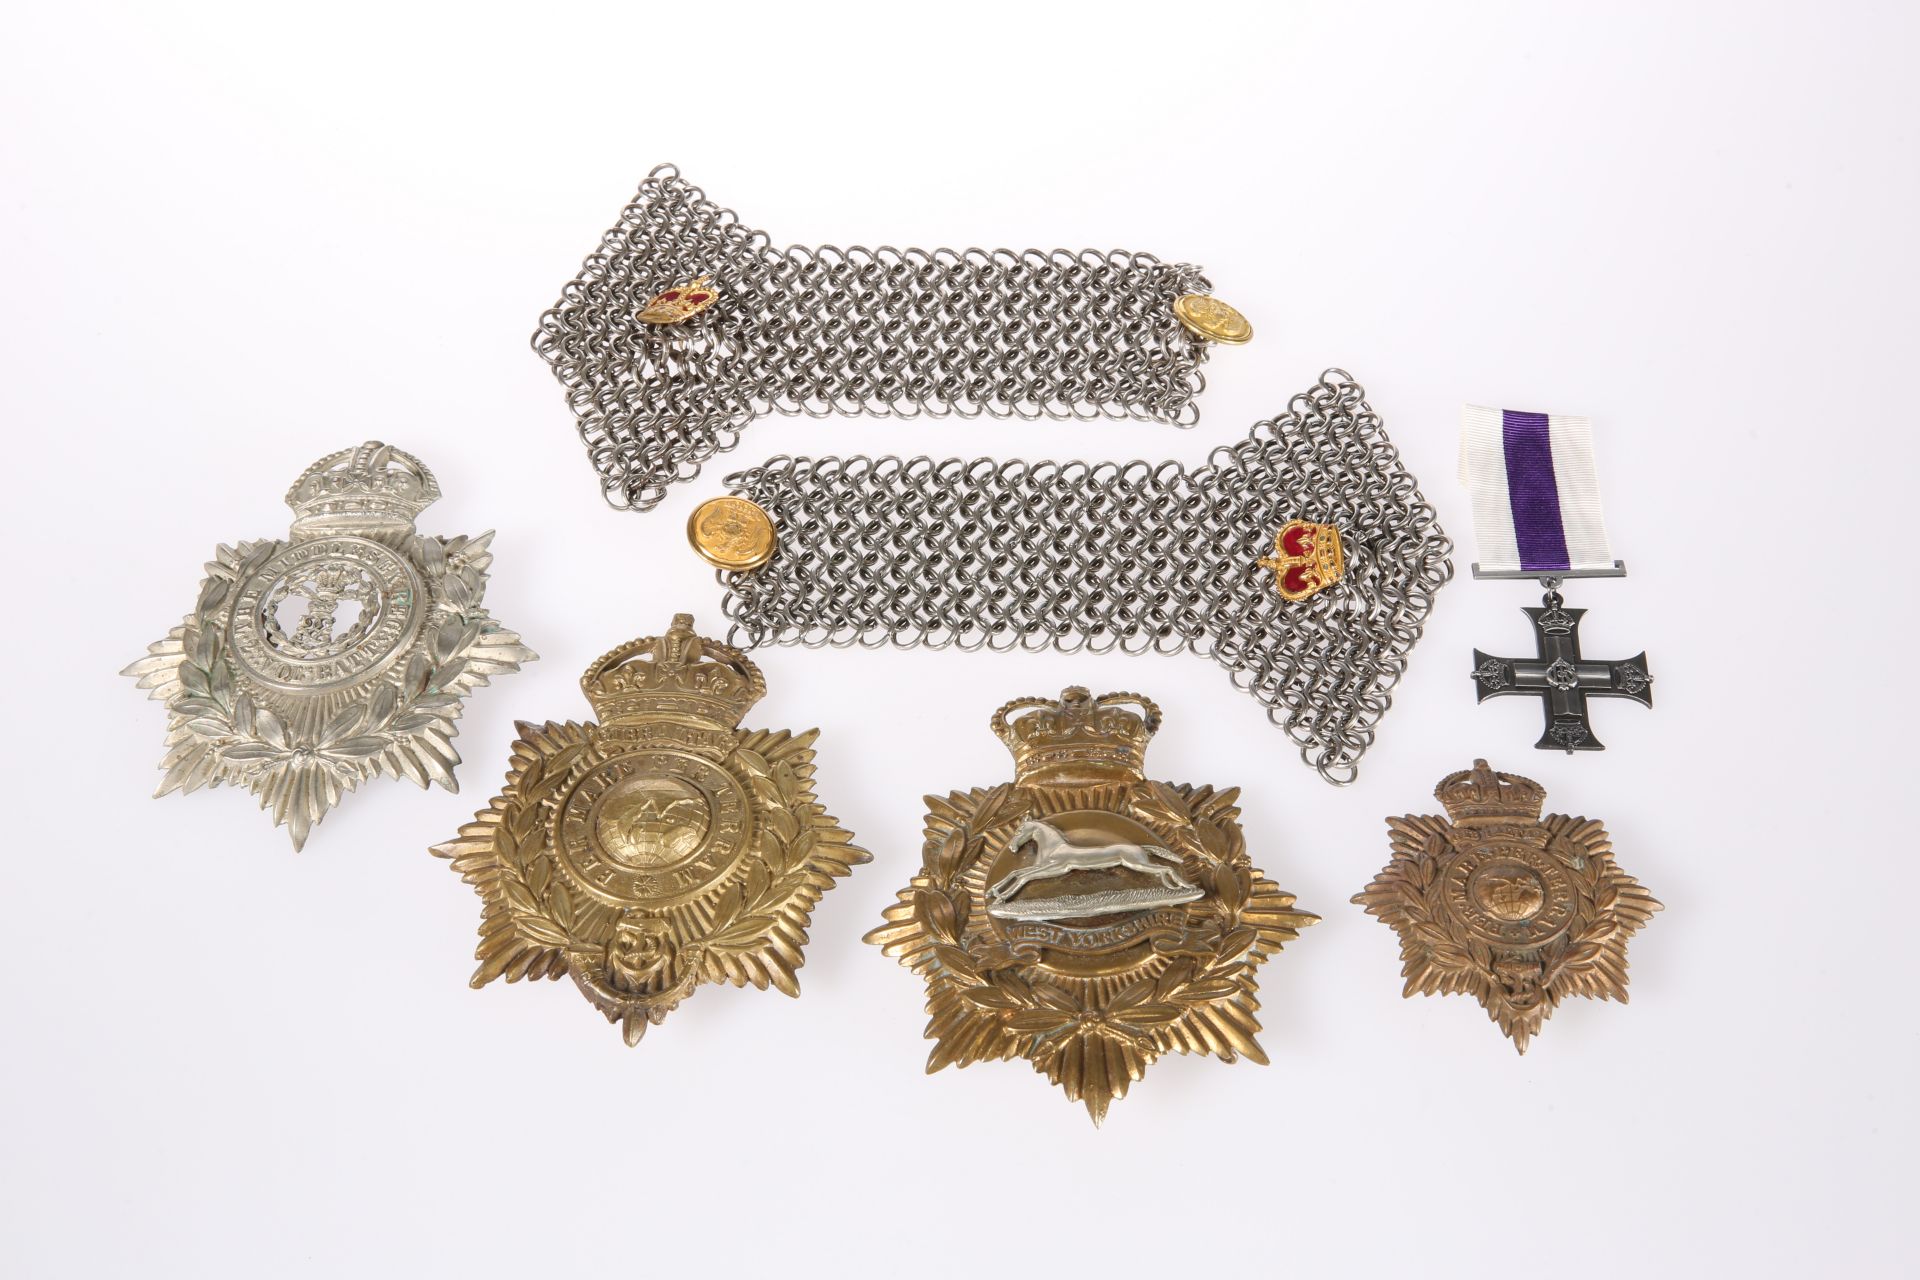 A PAIR OF OFFICER'S SHOULDER CHAINS OF THE ROYAL SCOTS GREYS, POST-1952